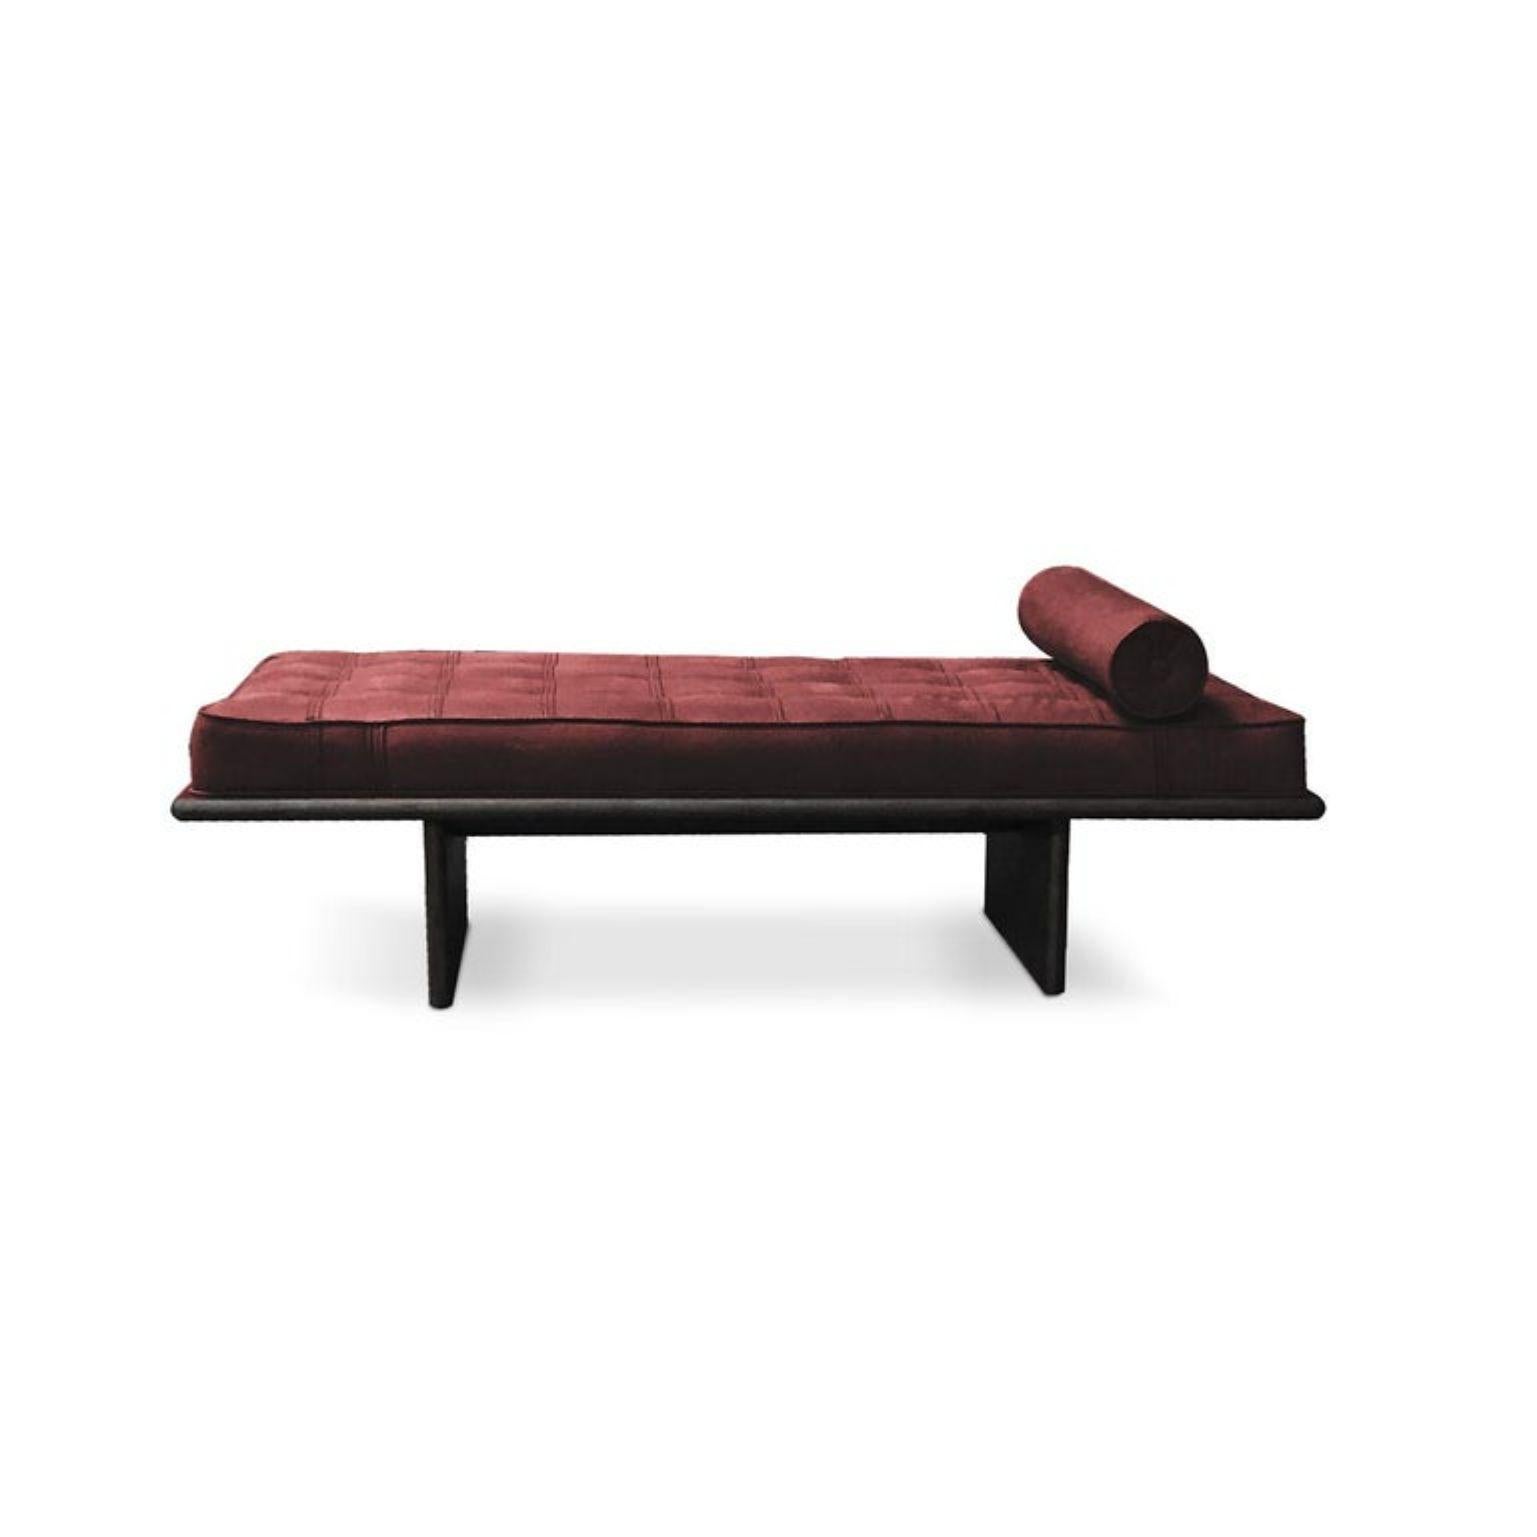 Frederic daybed by Collector
Materials: Structure in solid oak wood. Upholstered in genuine Sequoia 4003 leather
Dimensions: W 190 x D 90 x H 50 cm 

Frederic daybed it’s inspired by Japanese minimalism. With simple and clean structure, combined